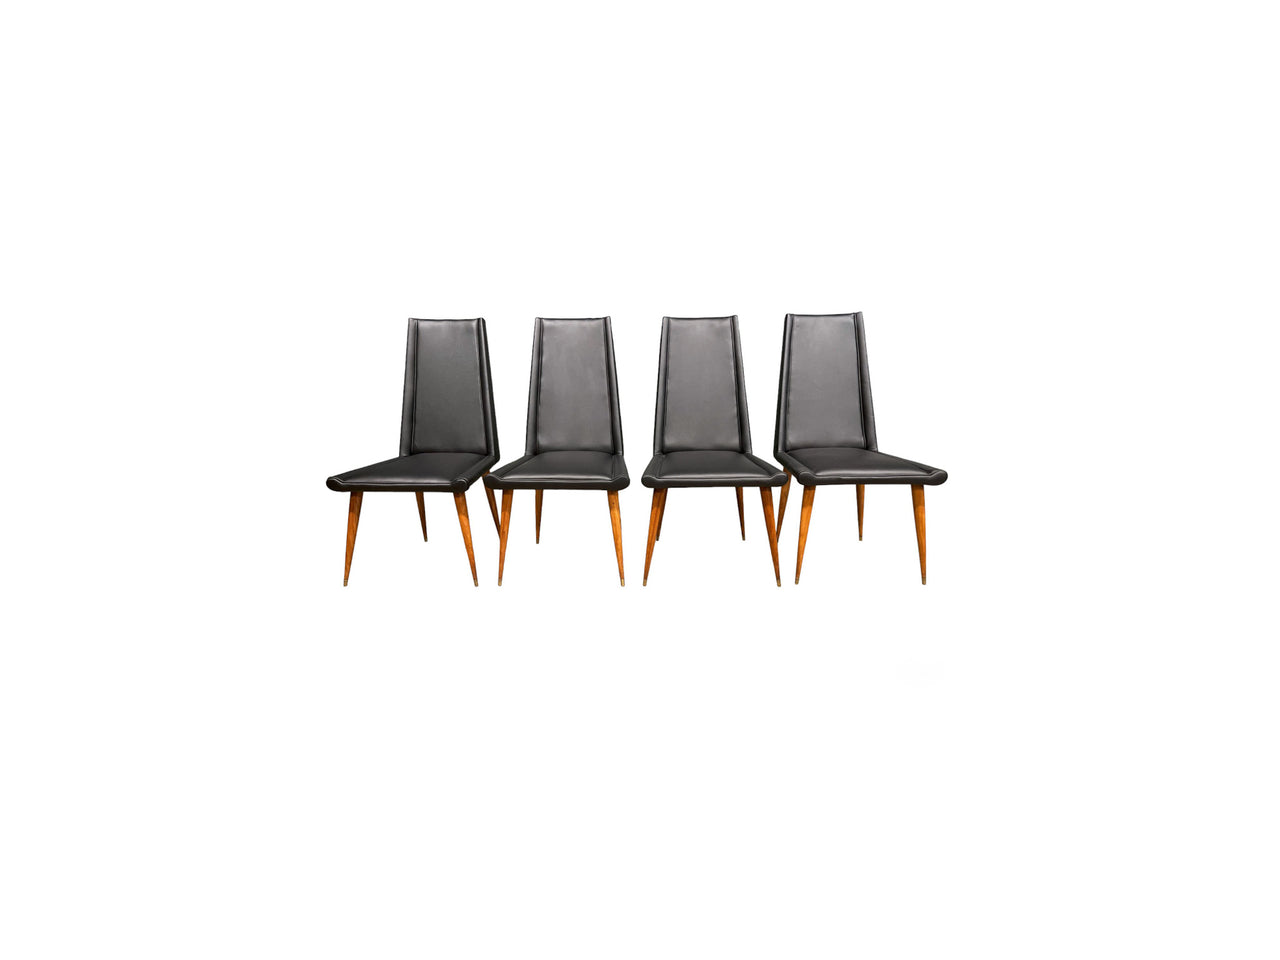 Four Chair Set in Hardwood & Black Leather by Giuseppe Scapinelli, 1950s - Lot 204A